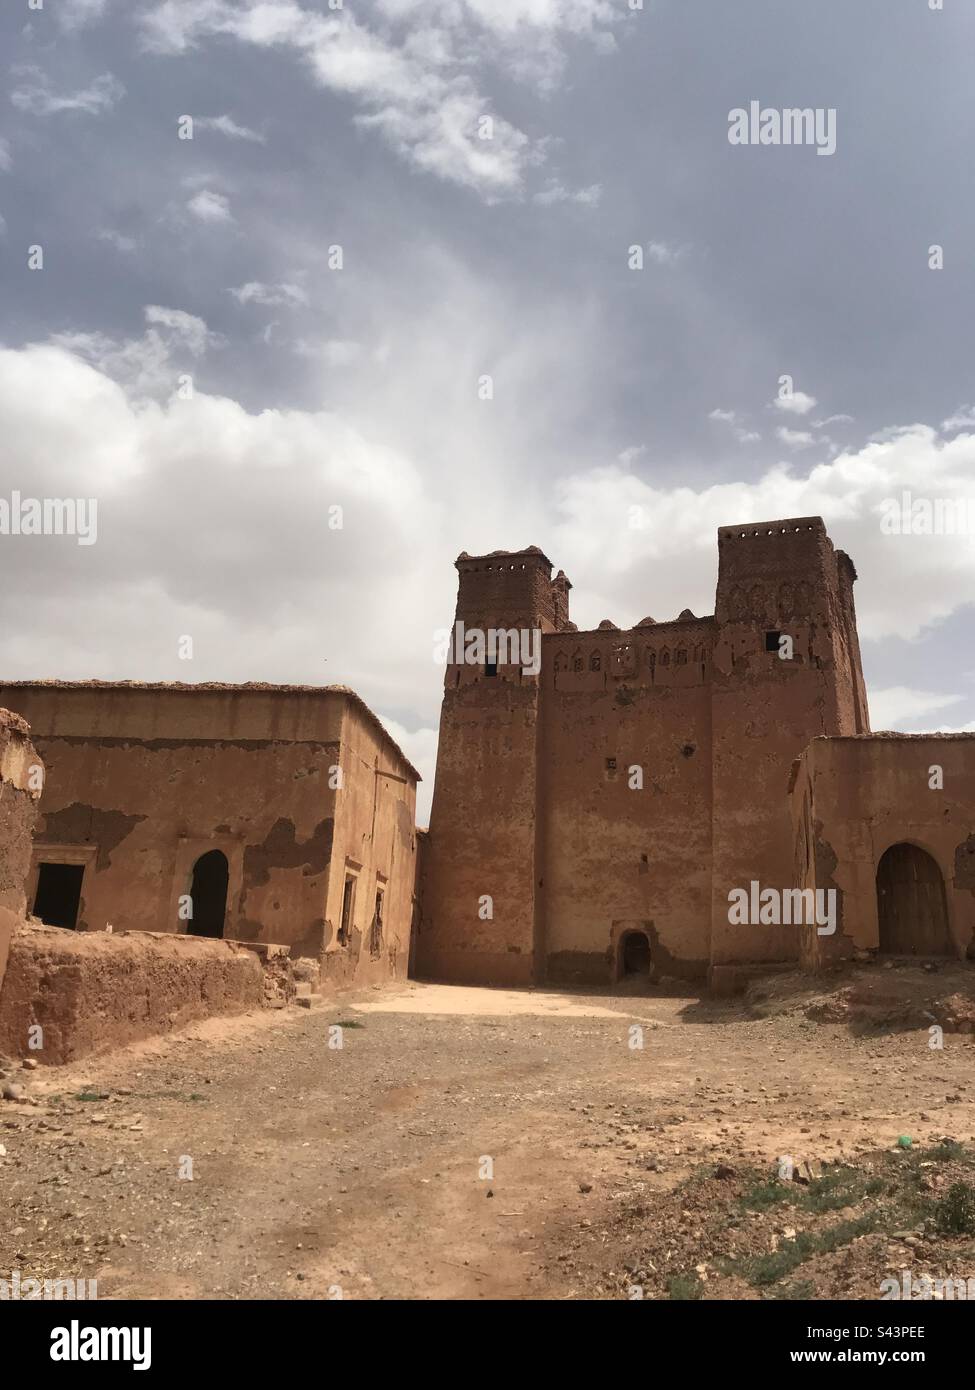 Ancient clay Kasbah in Toundoute Morocco Stock Photo